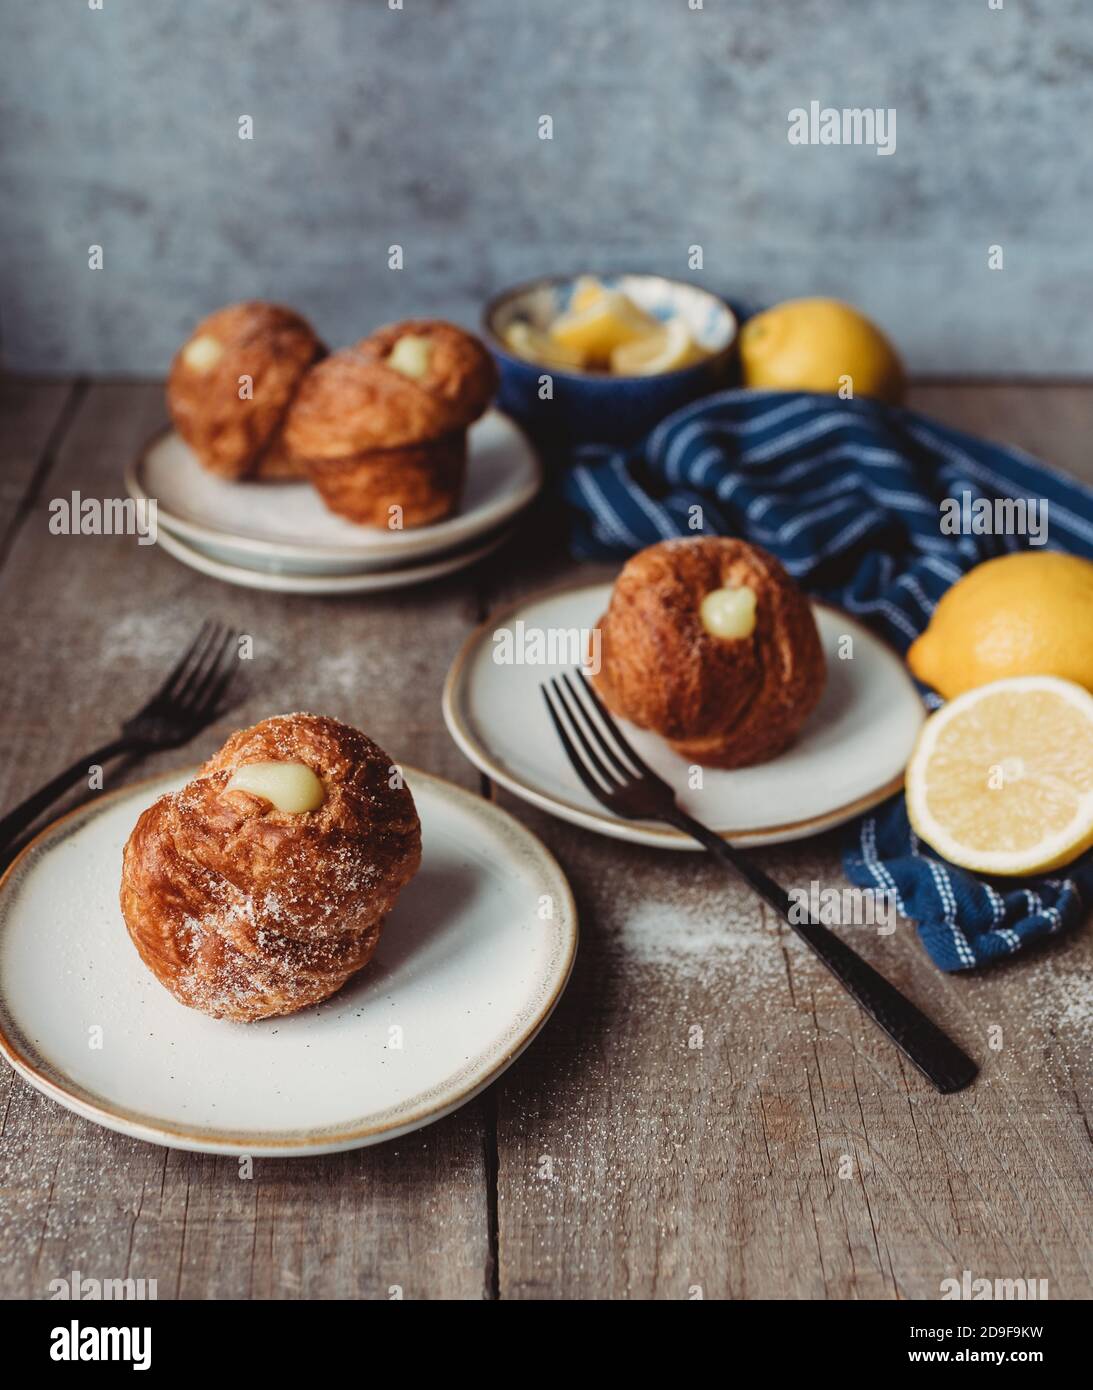 Lemon filled cruffins on wooden table with plates and forks. Stock Photo